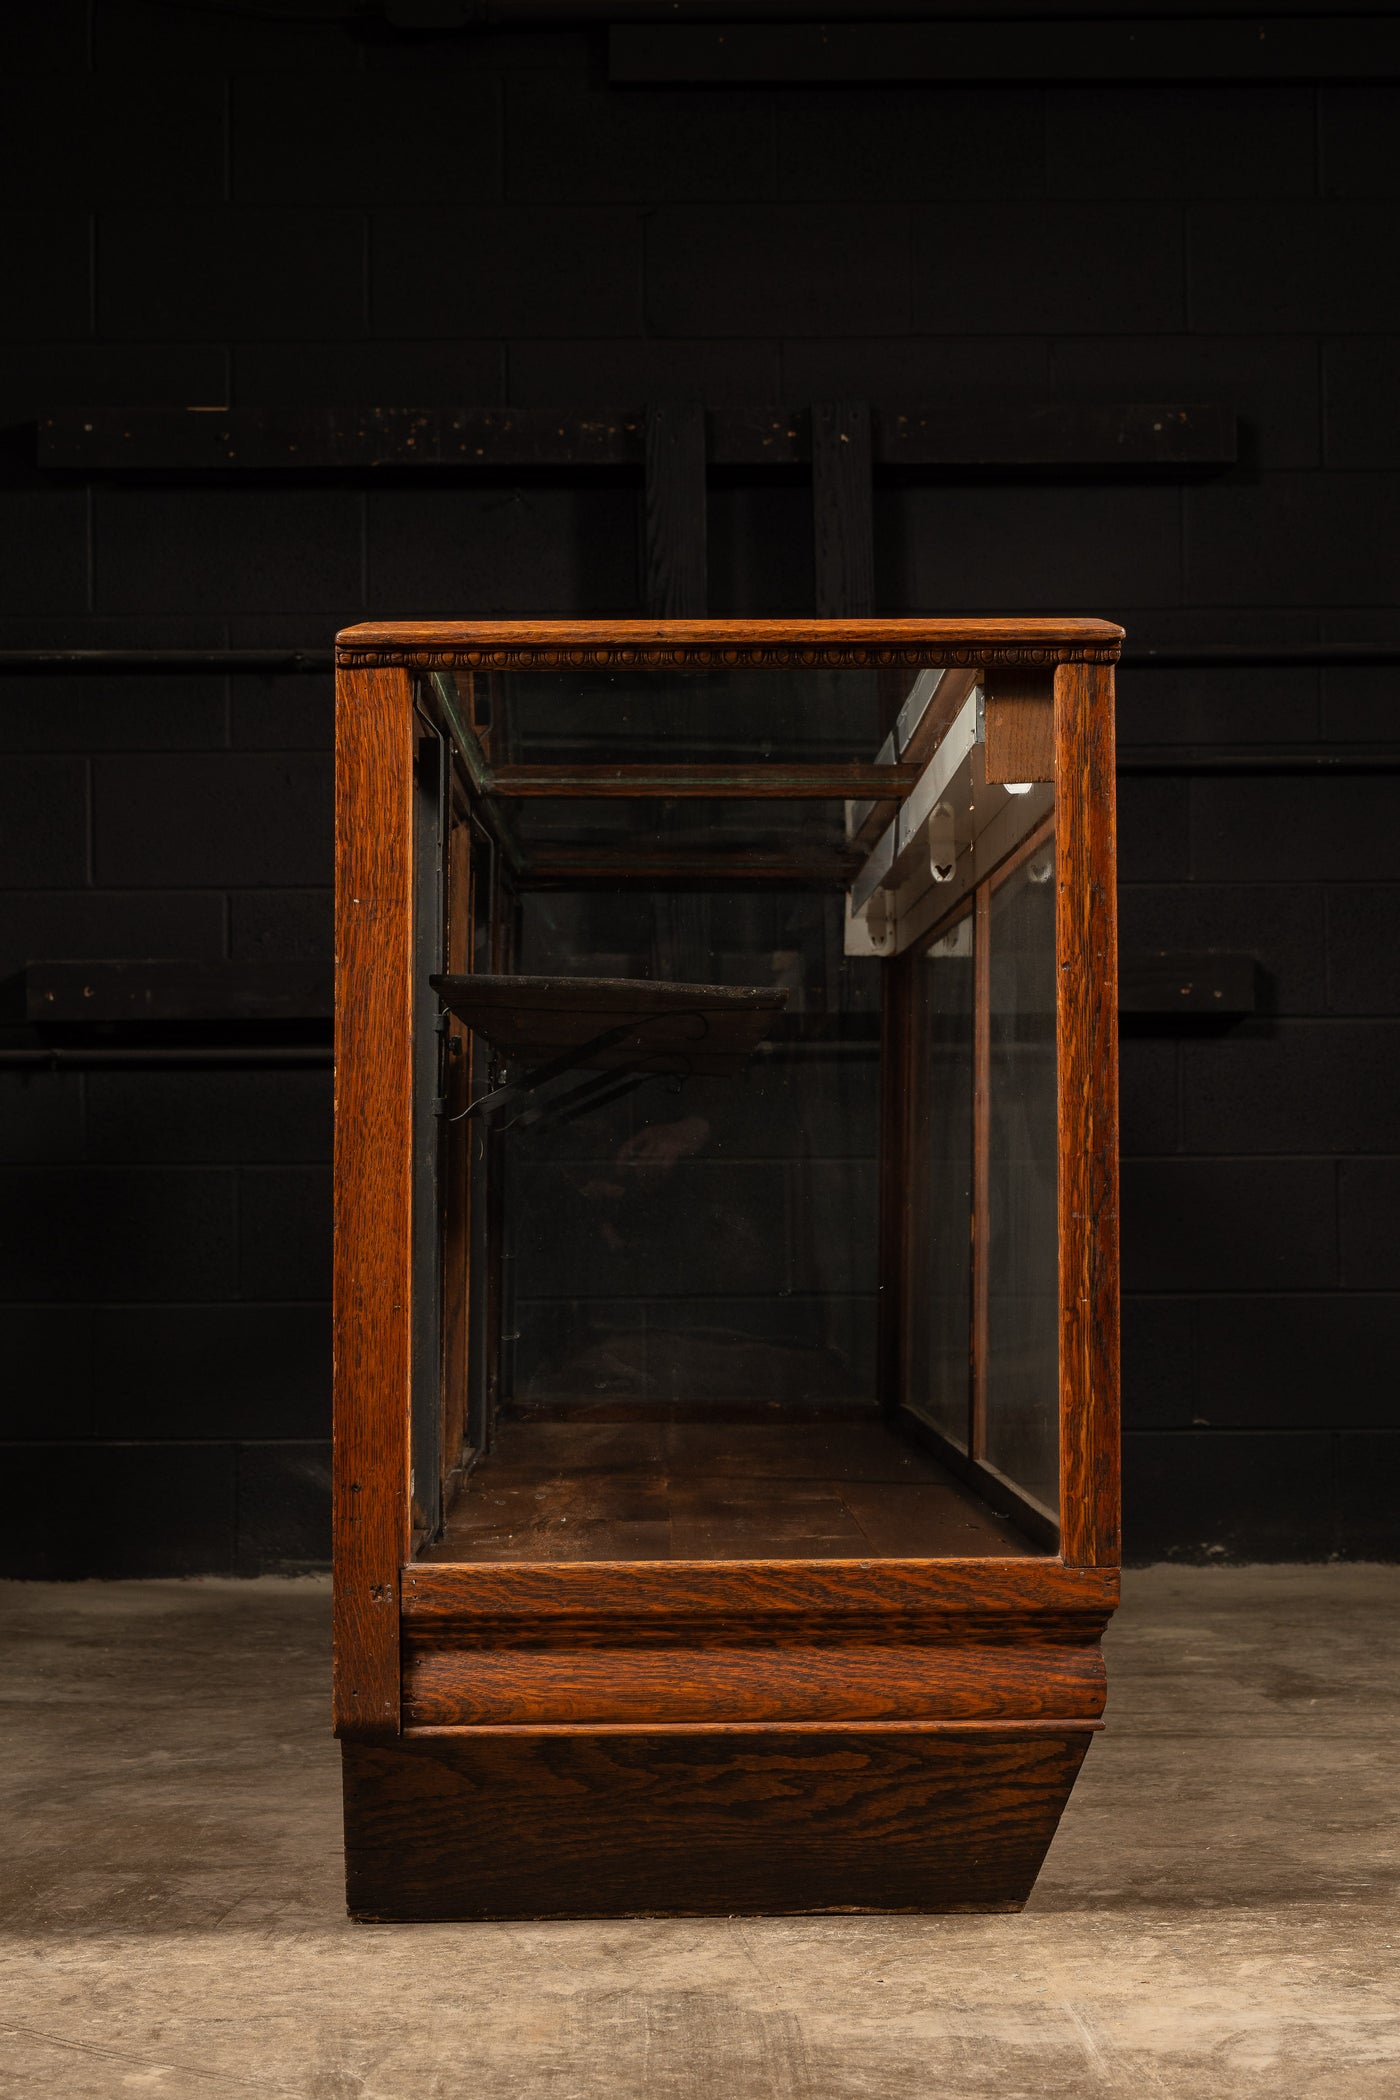 Early American Mercantile Display Case